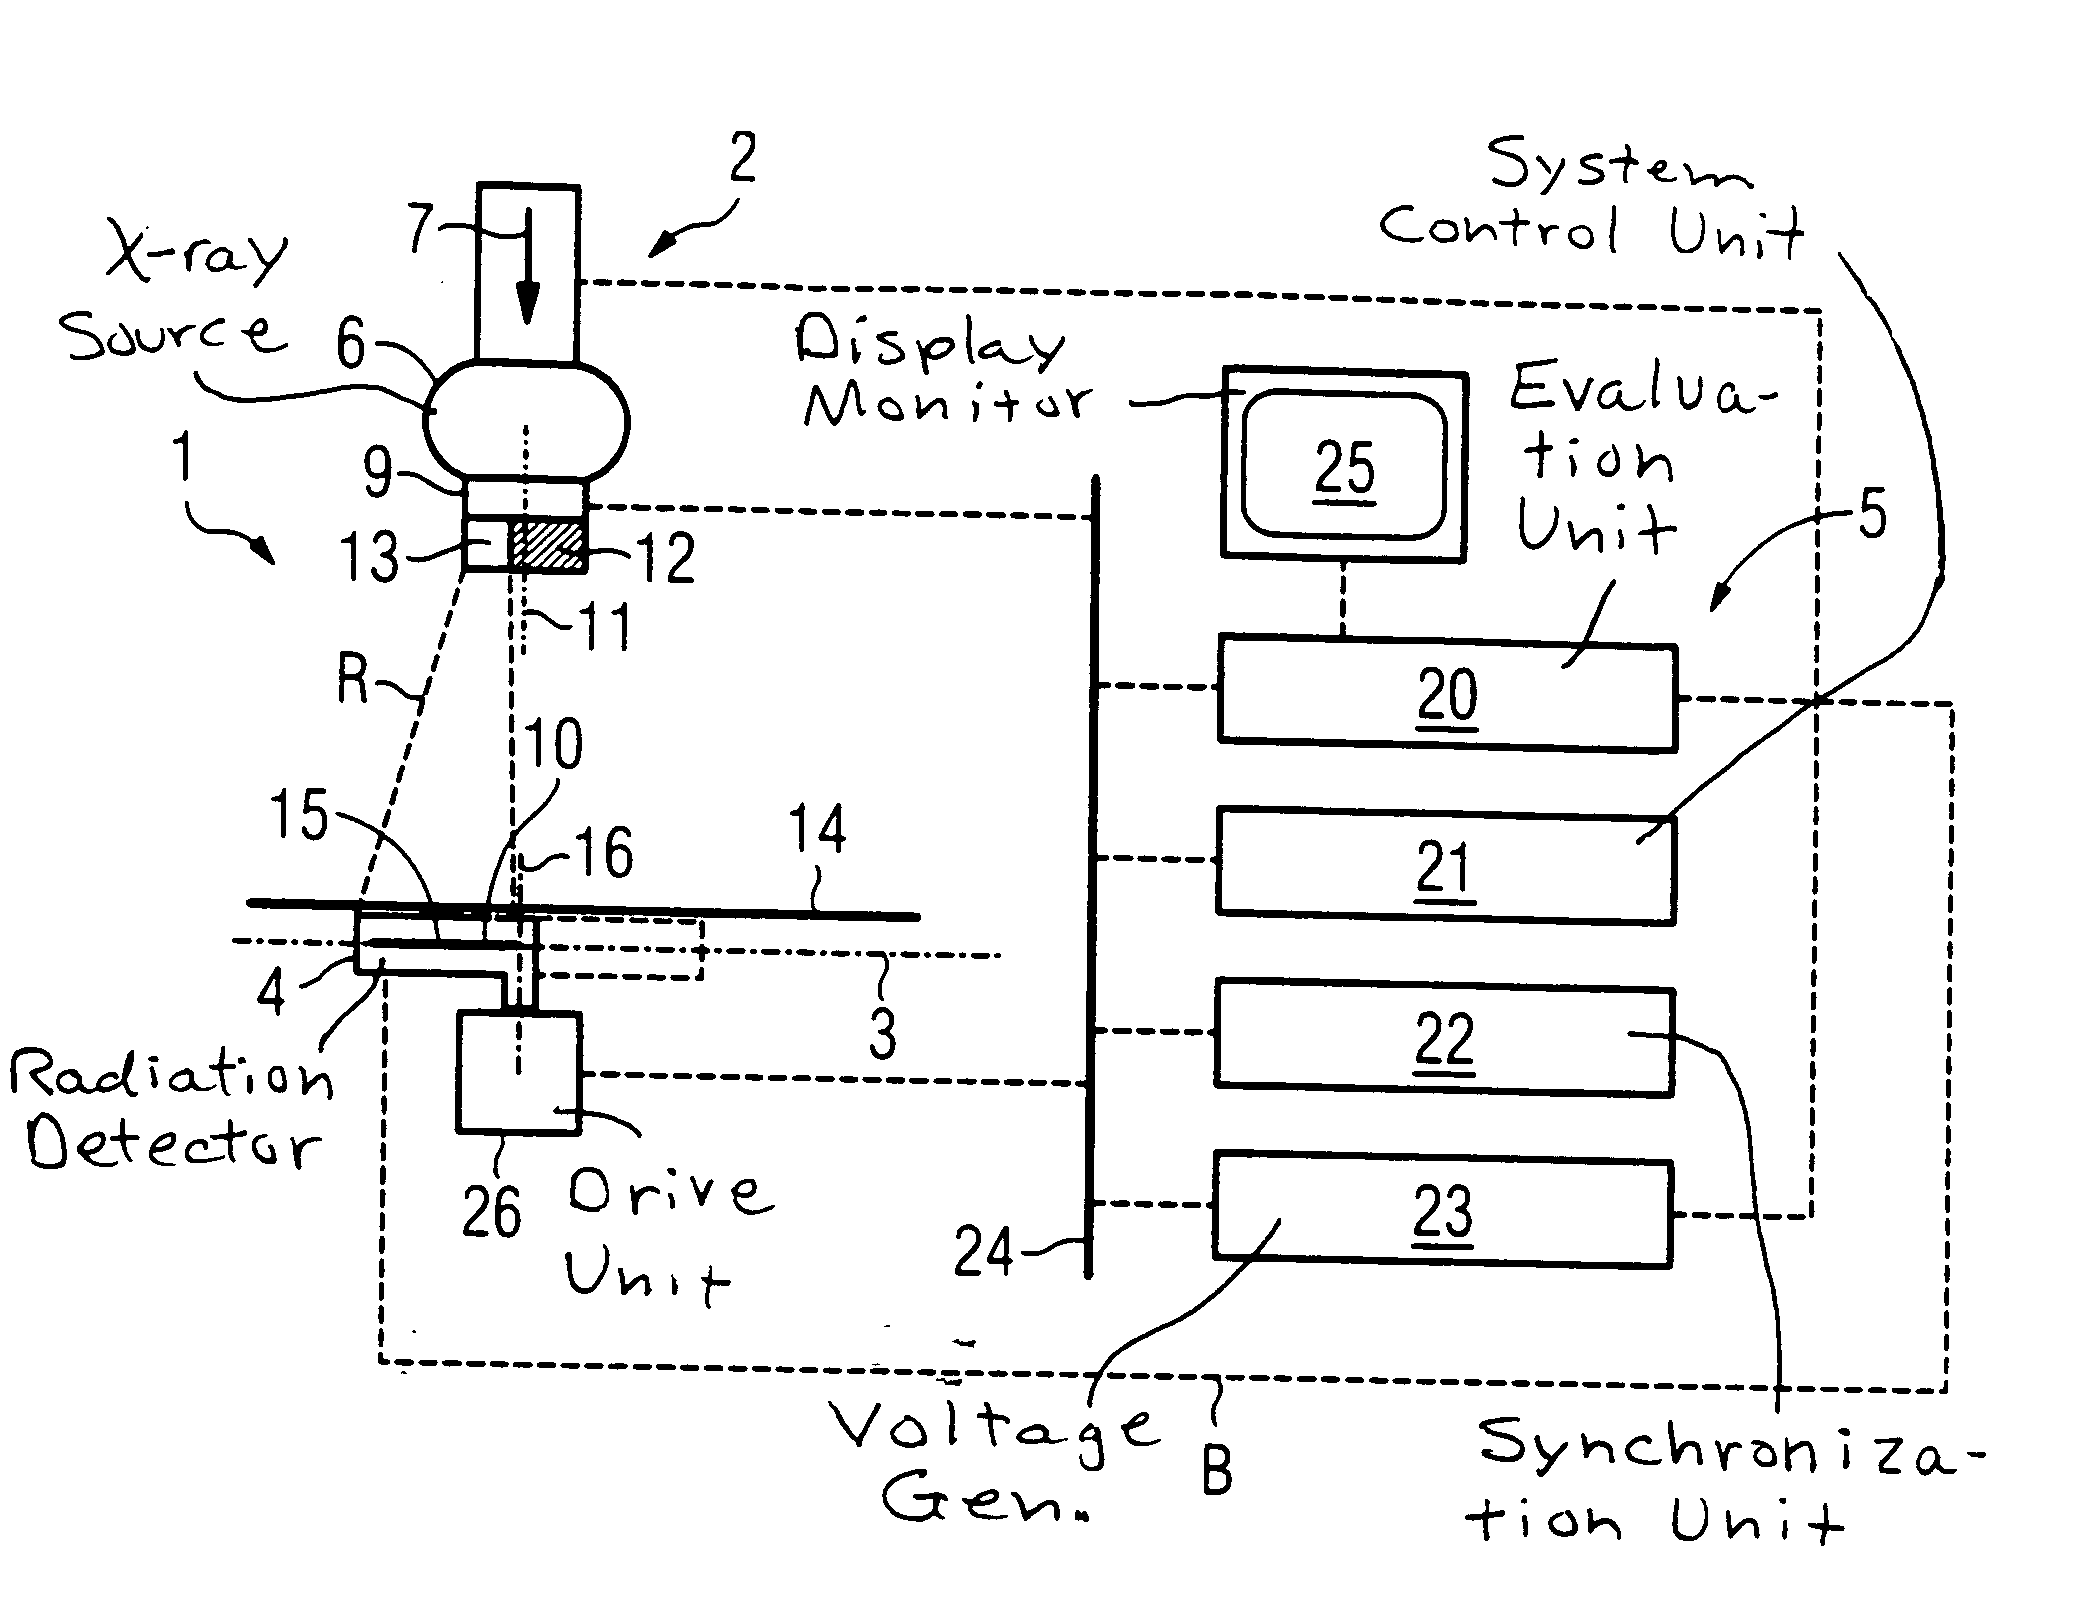 X-ray imaging apparatus with continuous, periodic movement of the radiation detector in the exposure plane